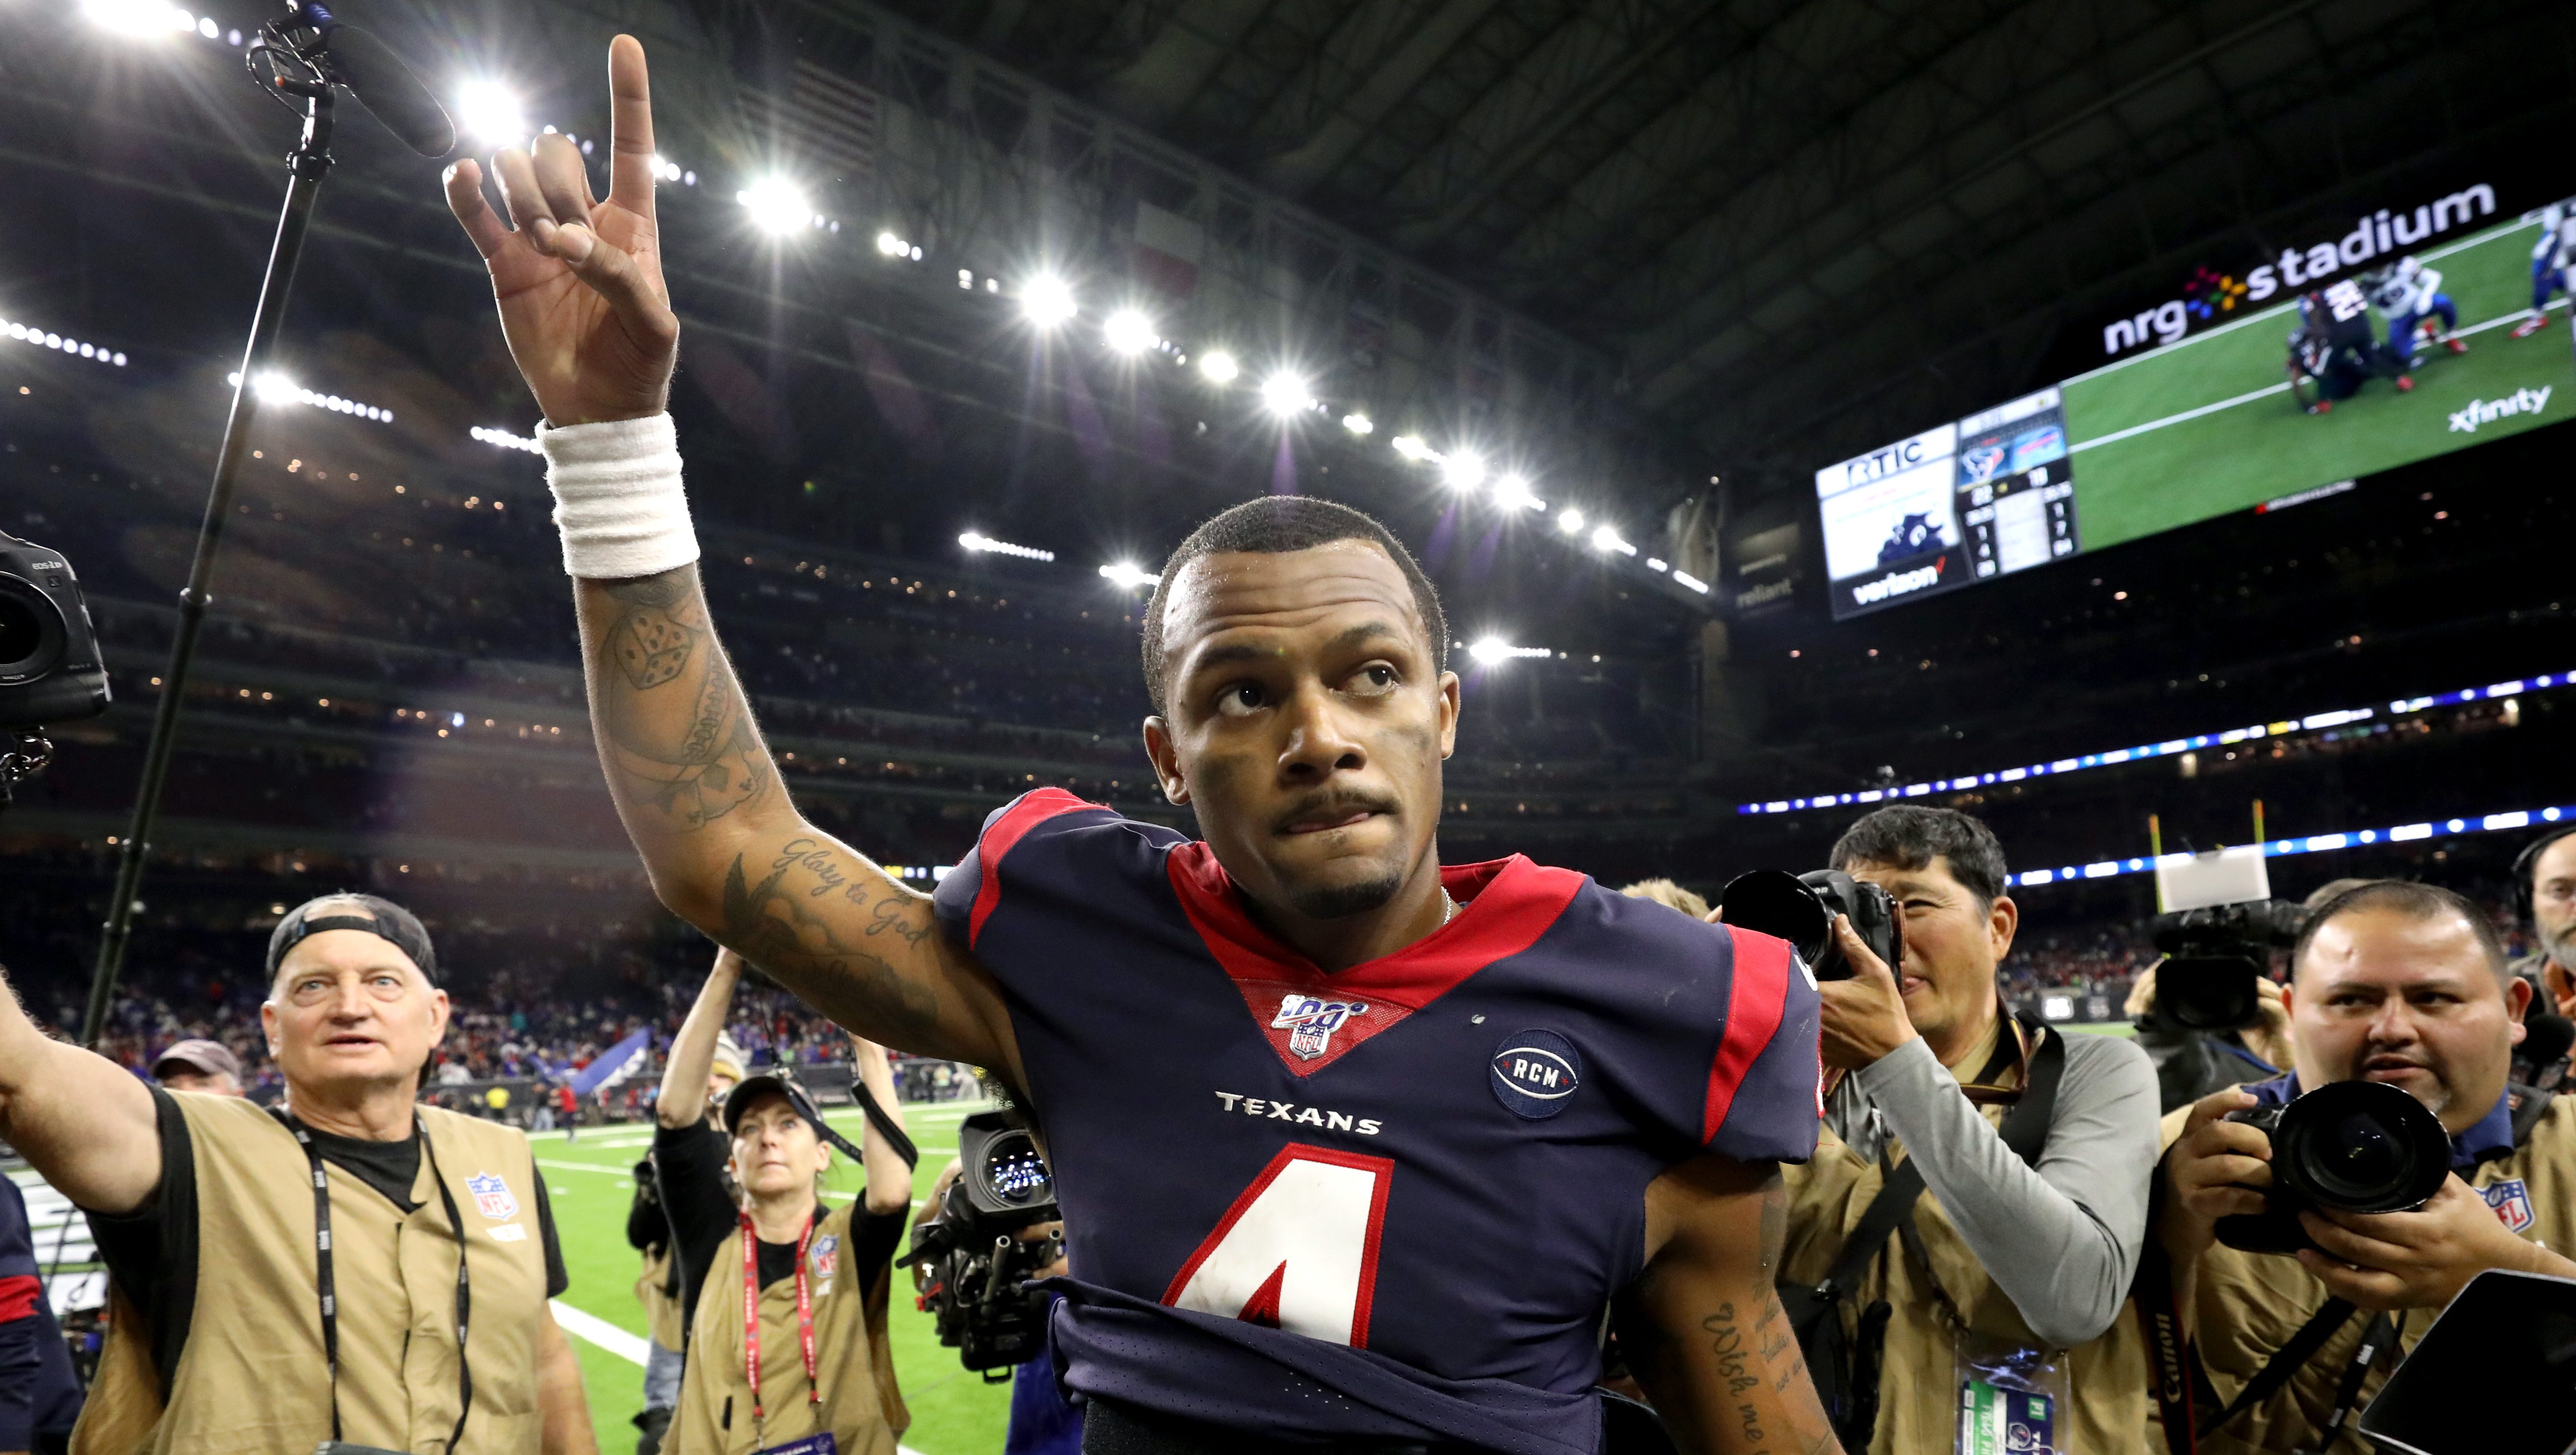 NFL Trade Rumors Texans Star Urges Fans Not to March for Him